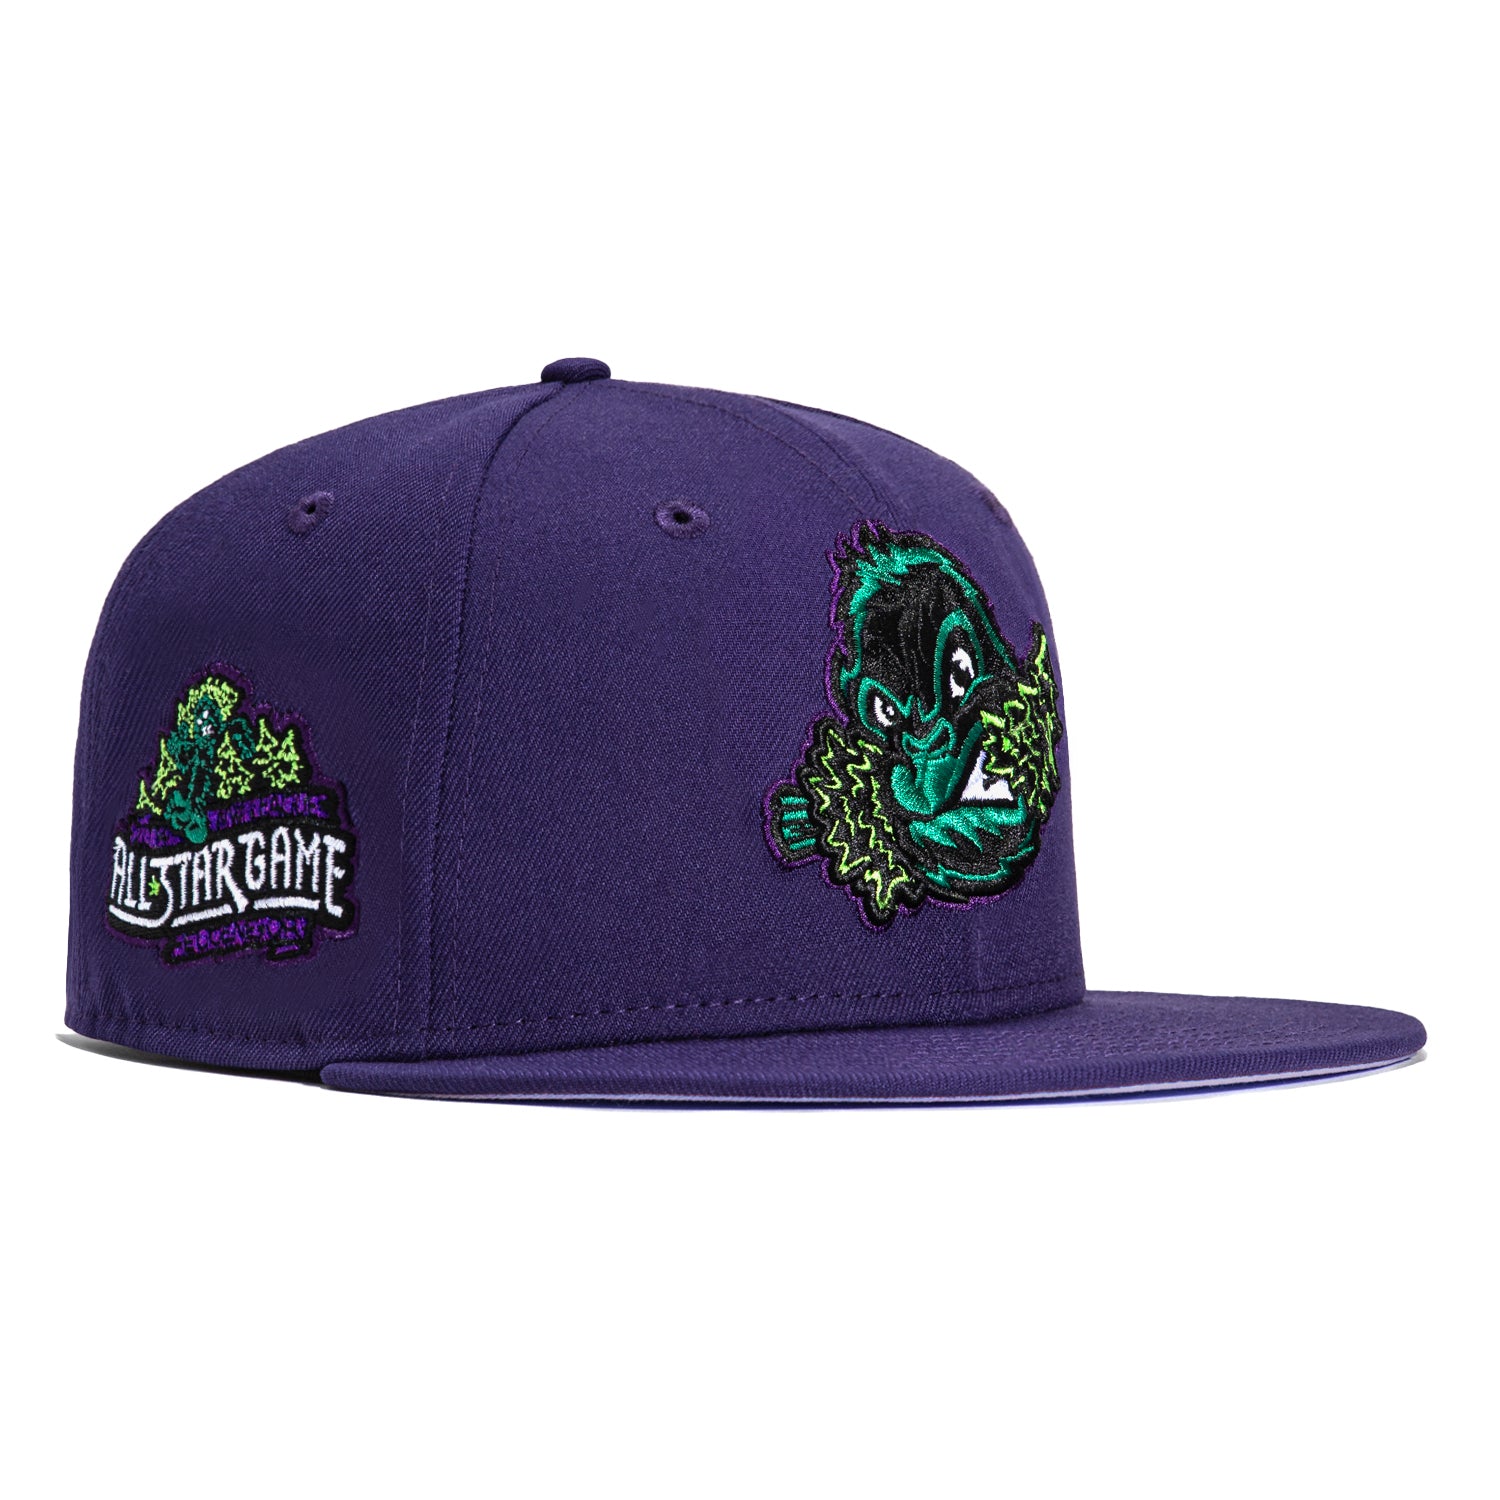 New Era 59FIFTY Turf Monsters Eugene Emeralds All Star Game Patch Hat - Purple Purple / 7